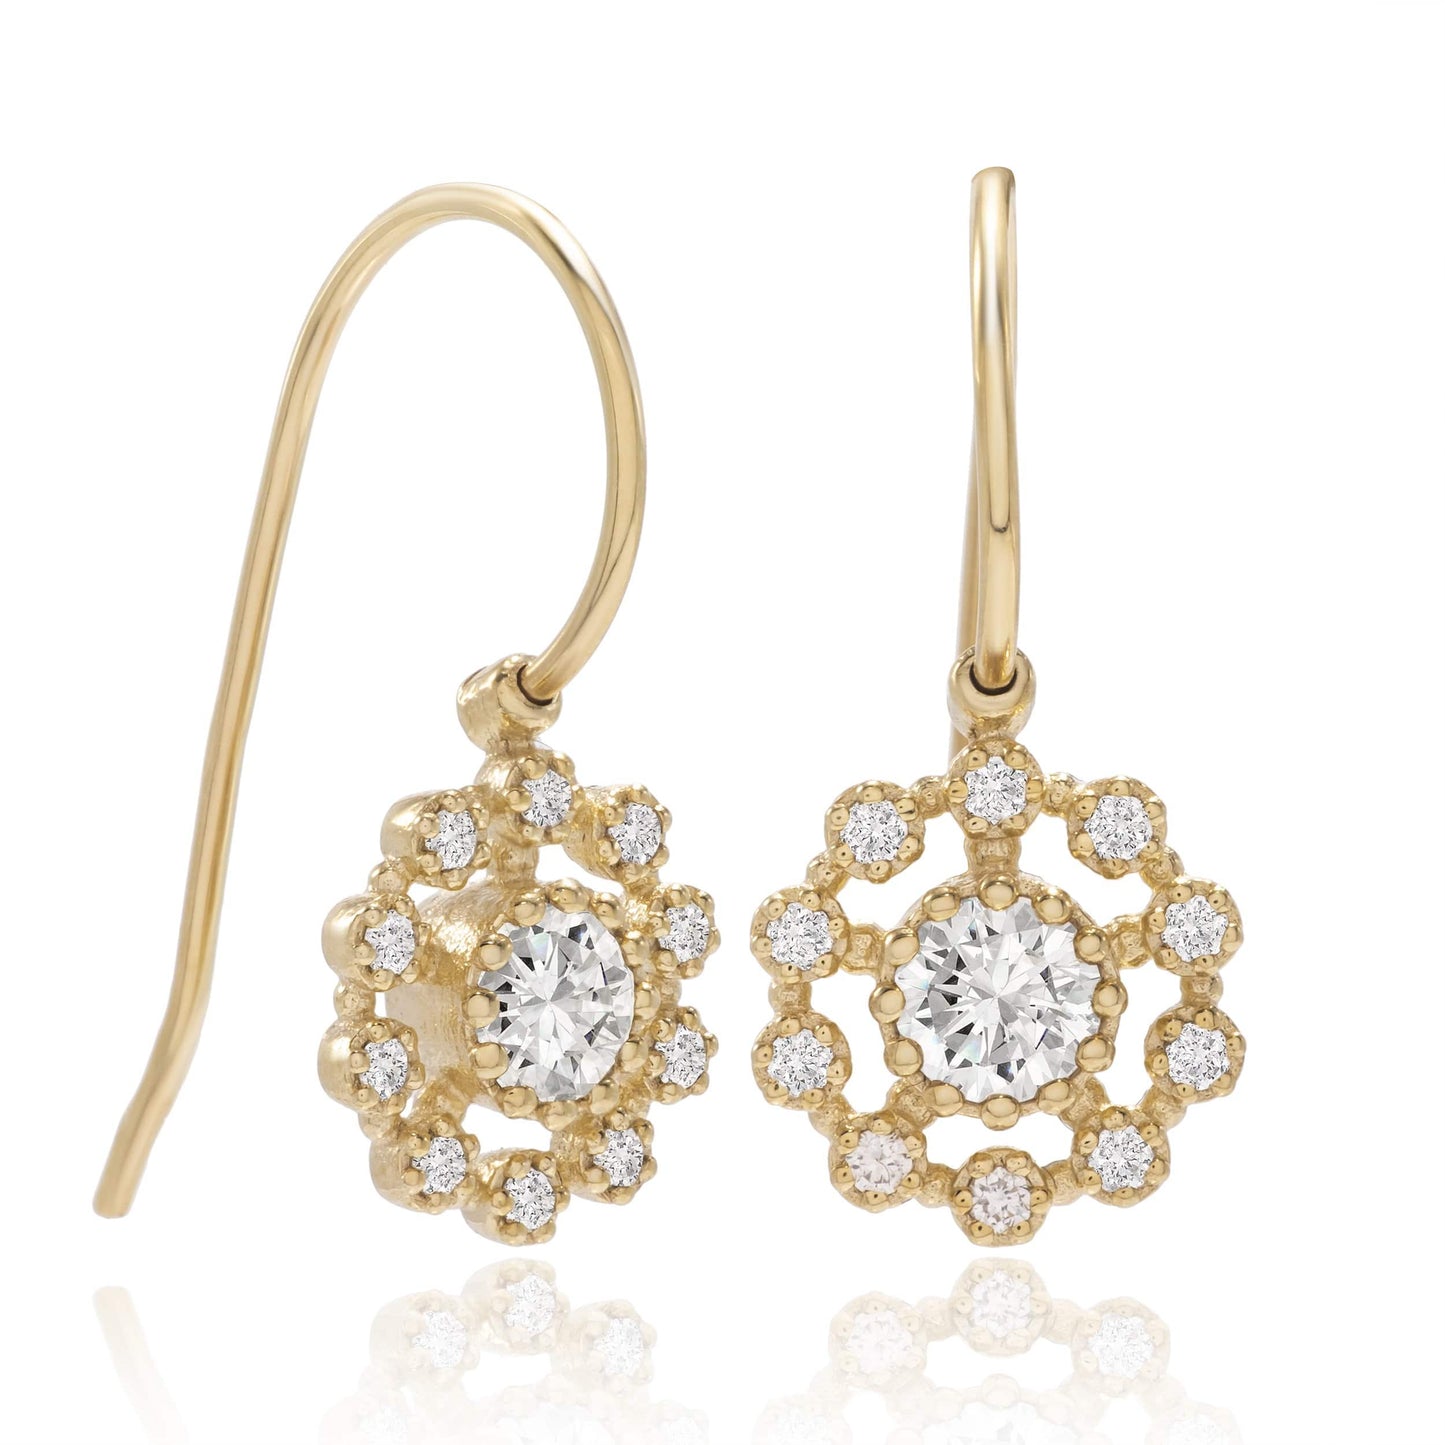 Dalia T Online Earrings Lace Collection 14KT Yellow Gold Diamond Earrings on a Hook